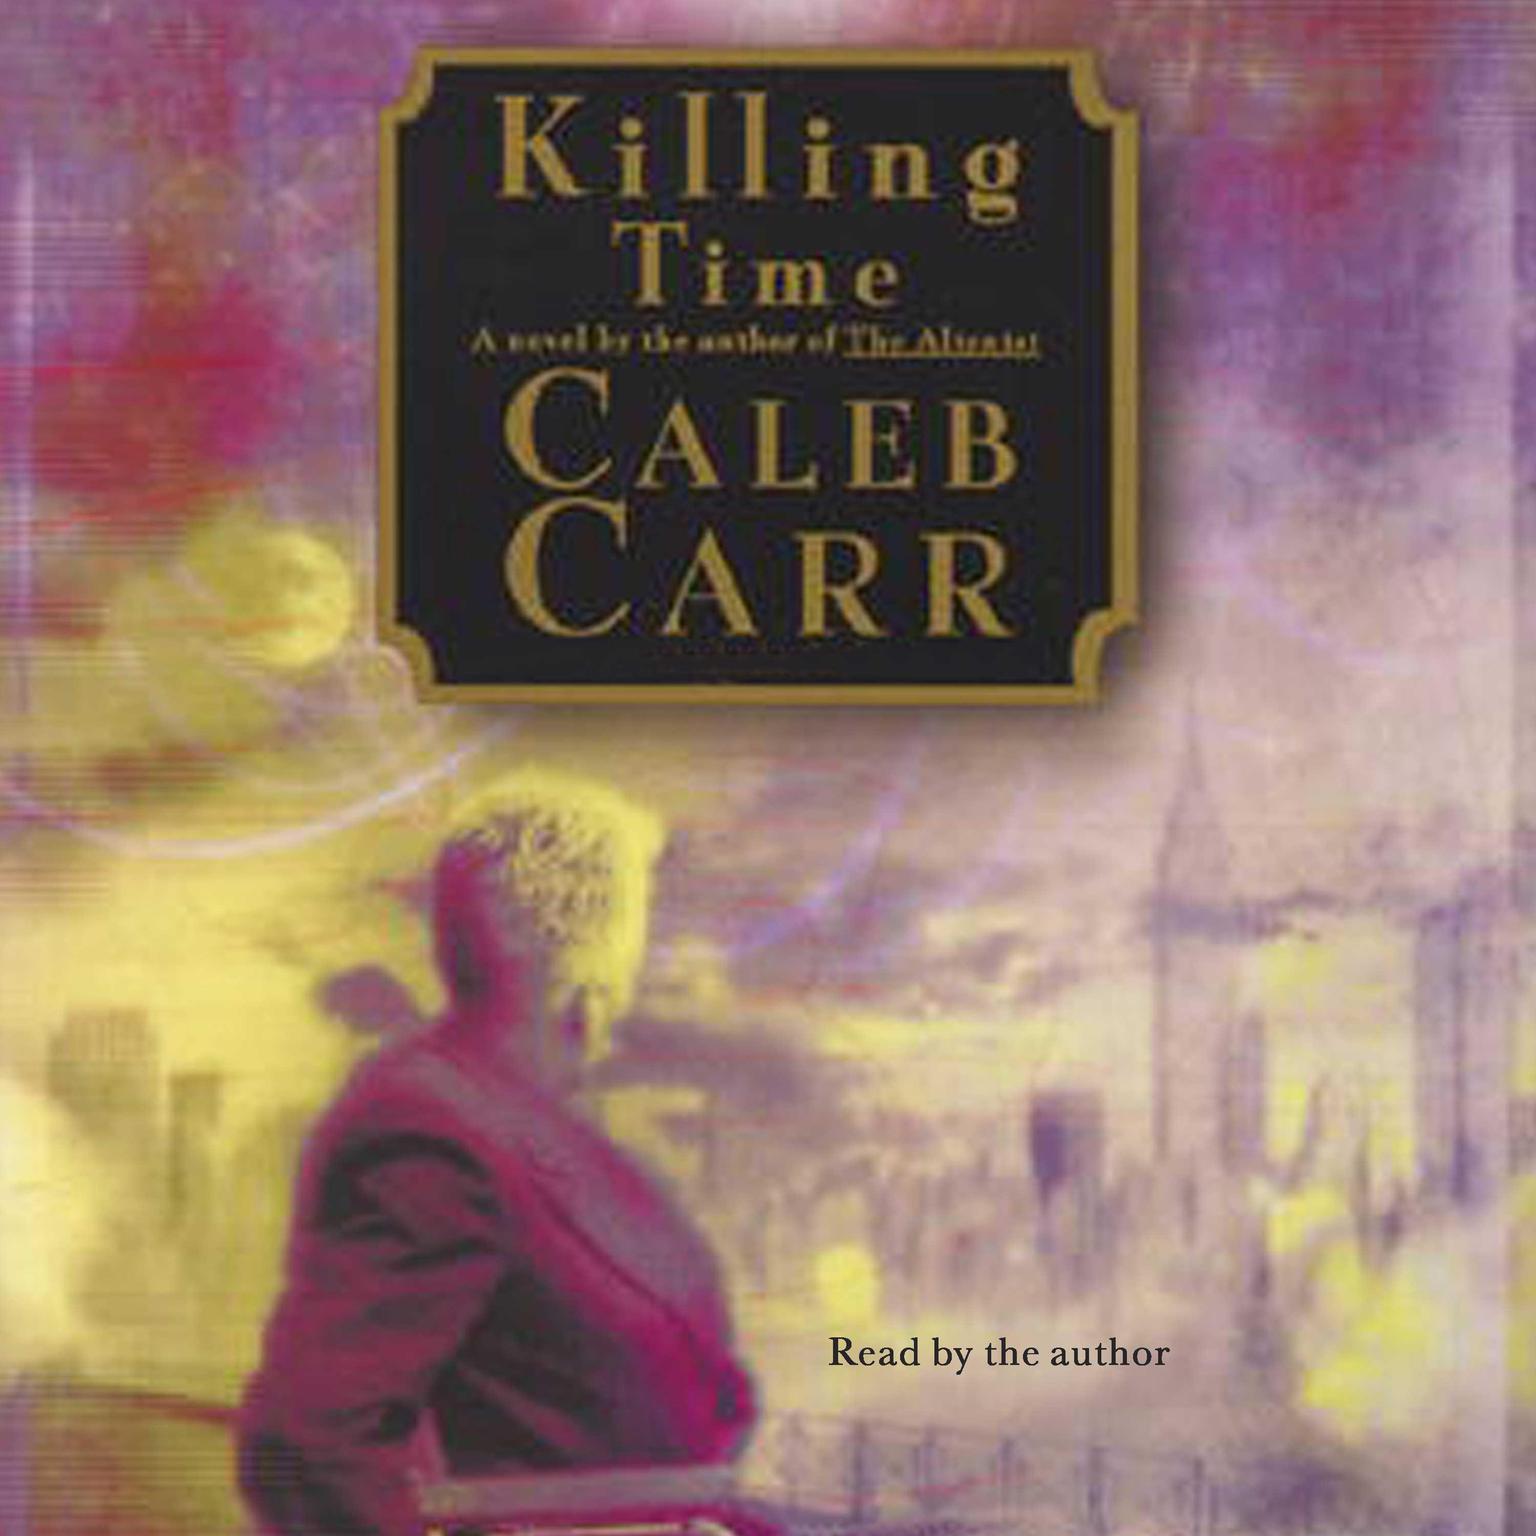 Killing Time (Abridged) Audiobook, by Caleb Carr